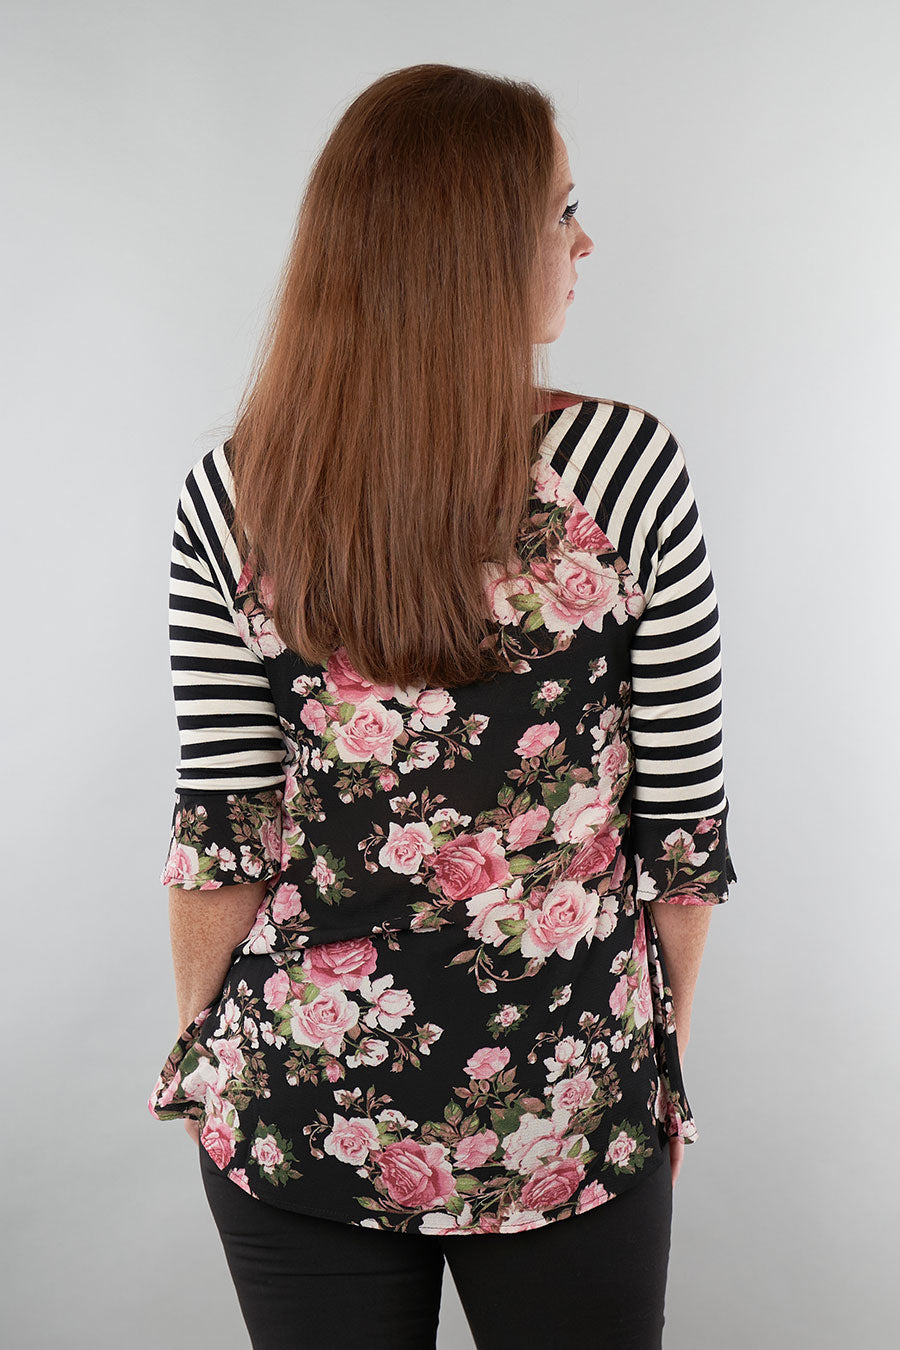 Spring Fever Floral Tunic With Striped Sleeves Back